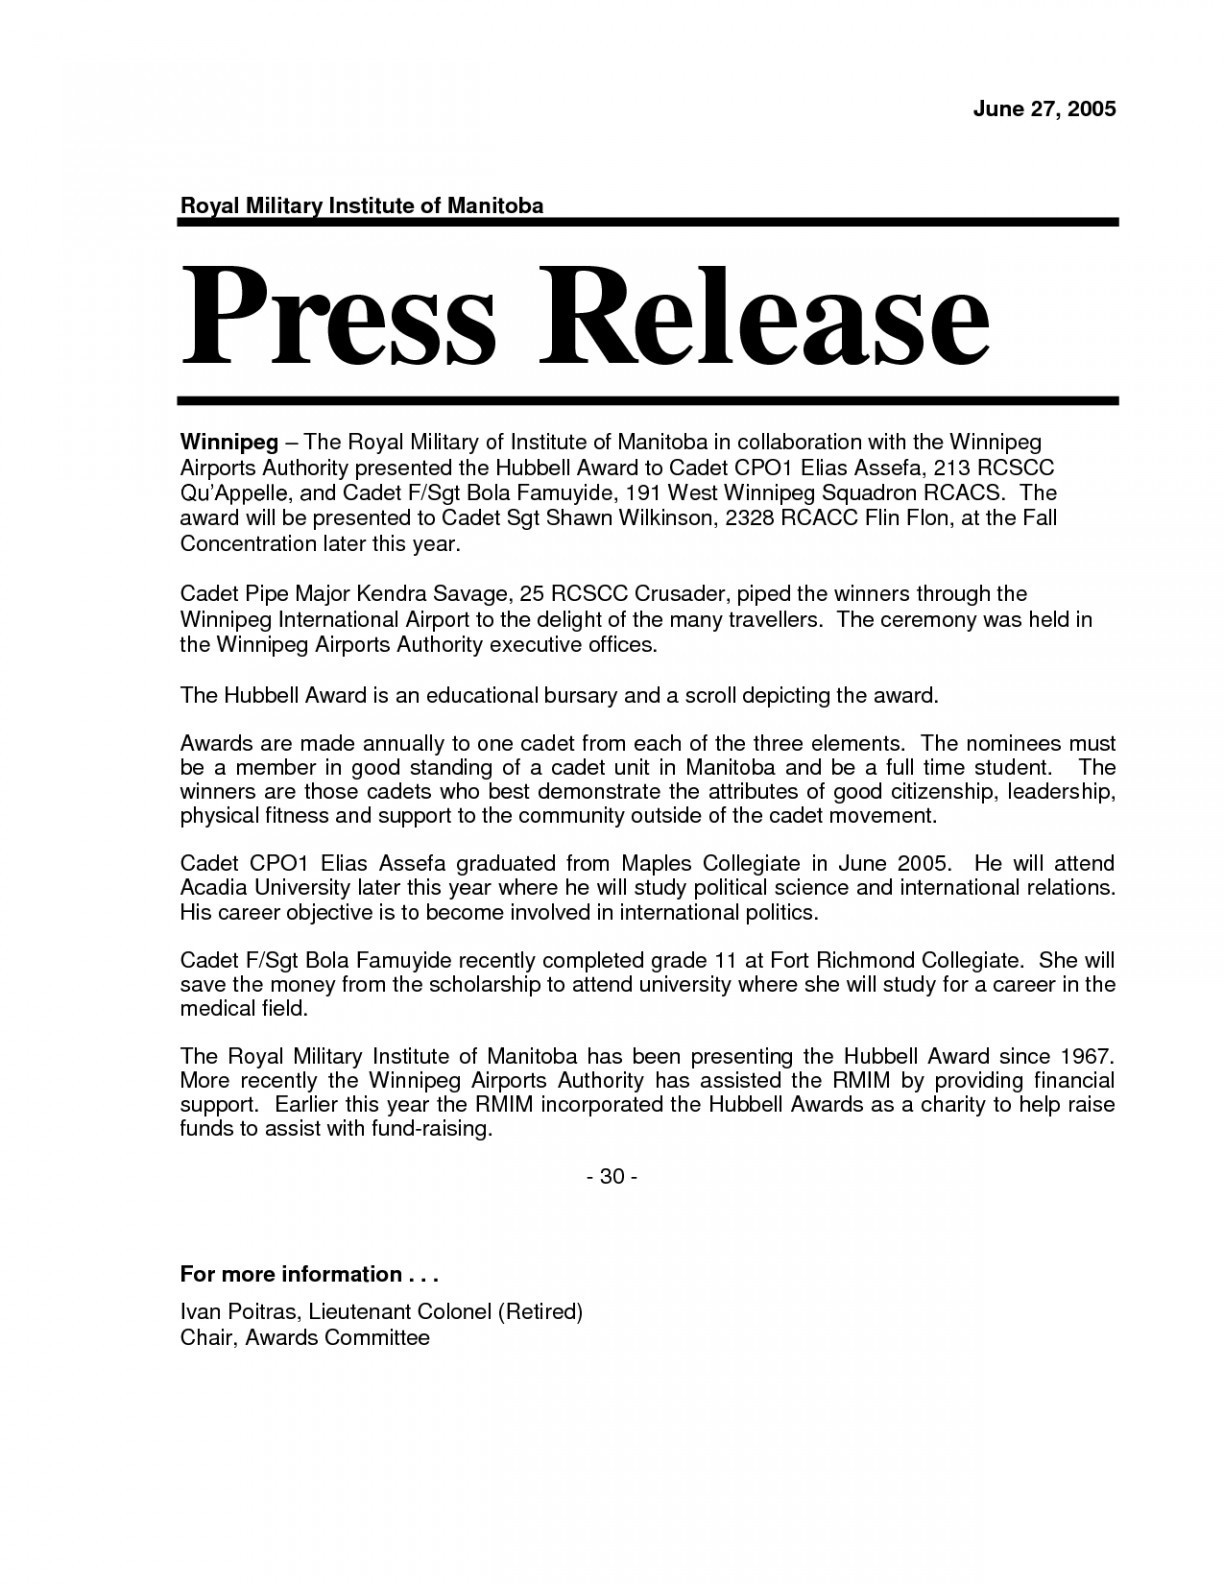 Press Release Format Copy Press Release Format Word Or New Press 